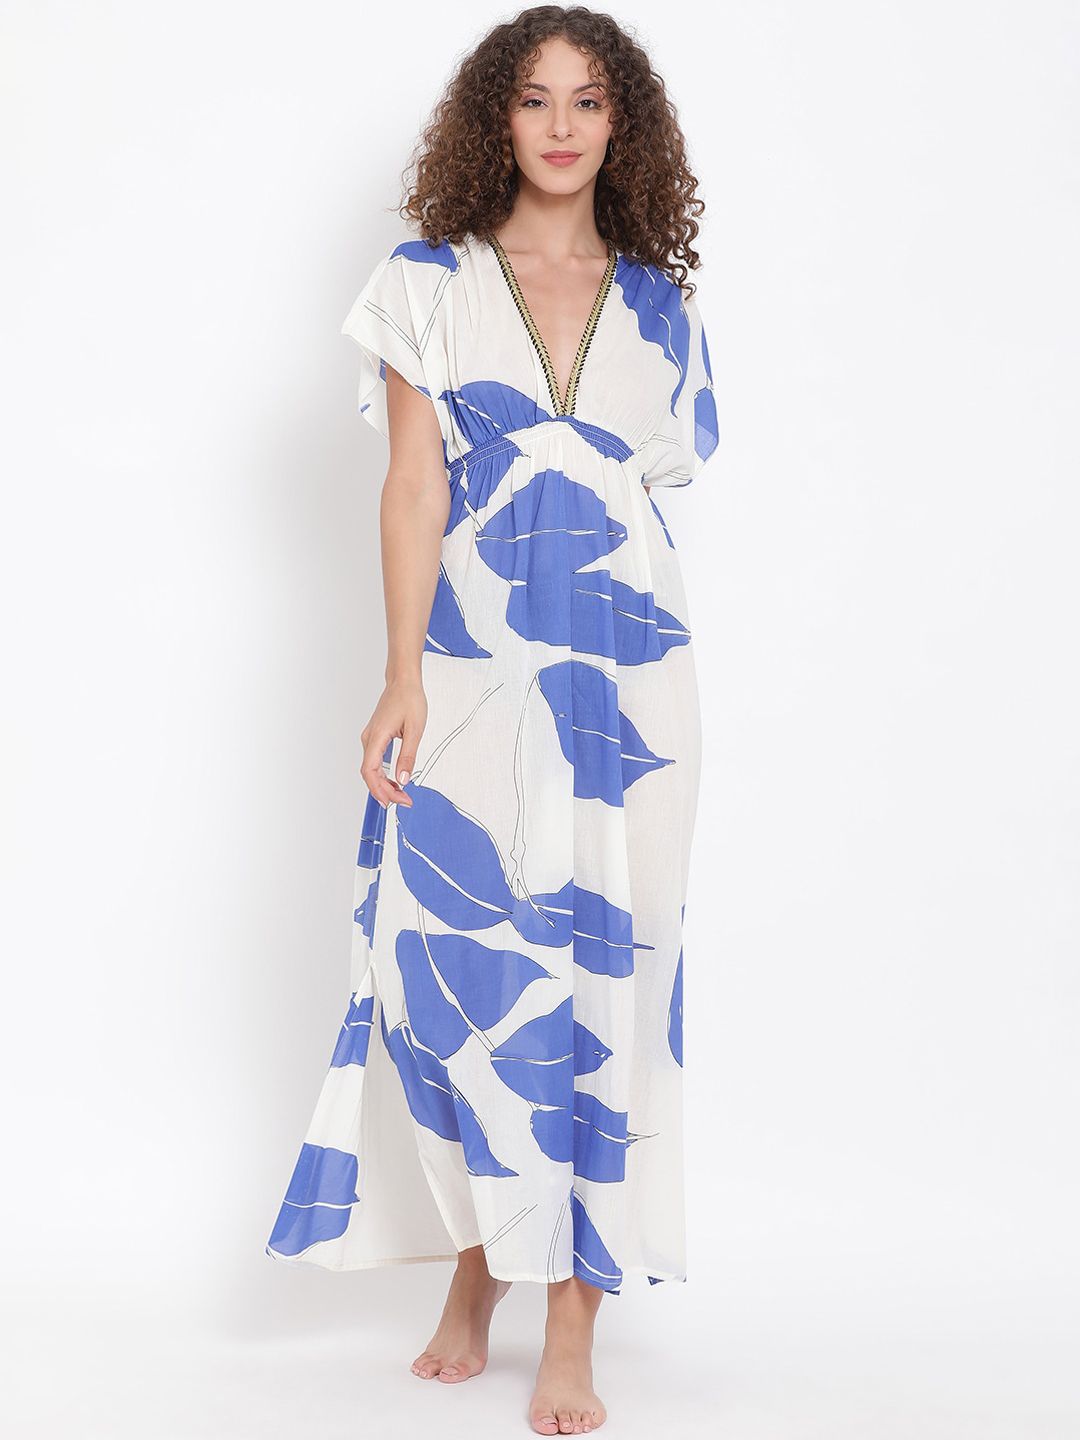 Oxolloxo Women White & Blue Printed Cover-Up Swim Dress Price in India